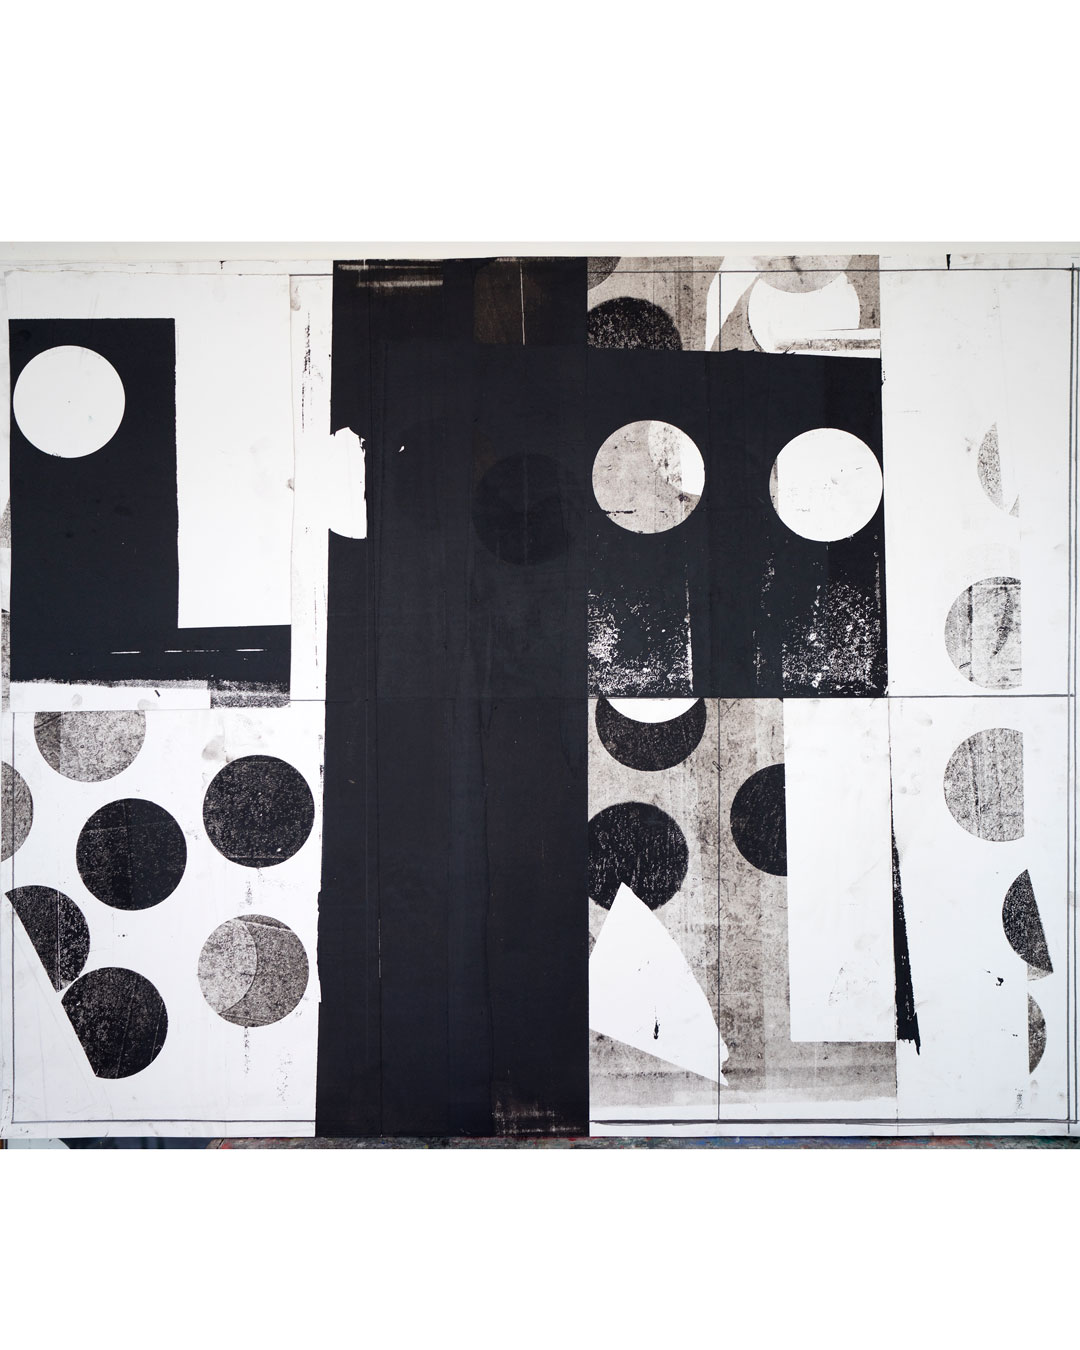 Piet Dieleman, untitled, 2020, collage, oil based monotype ink, pencil, acrylic binder on paper, 1290 x 1590 mm, €3270